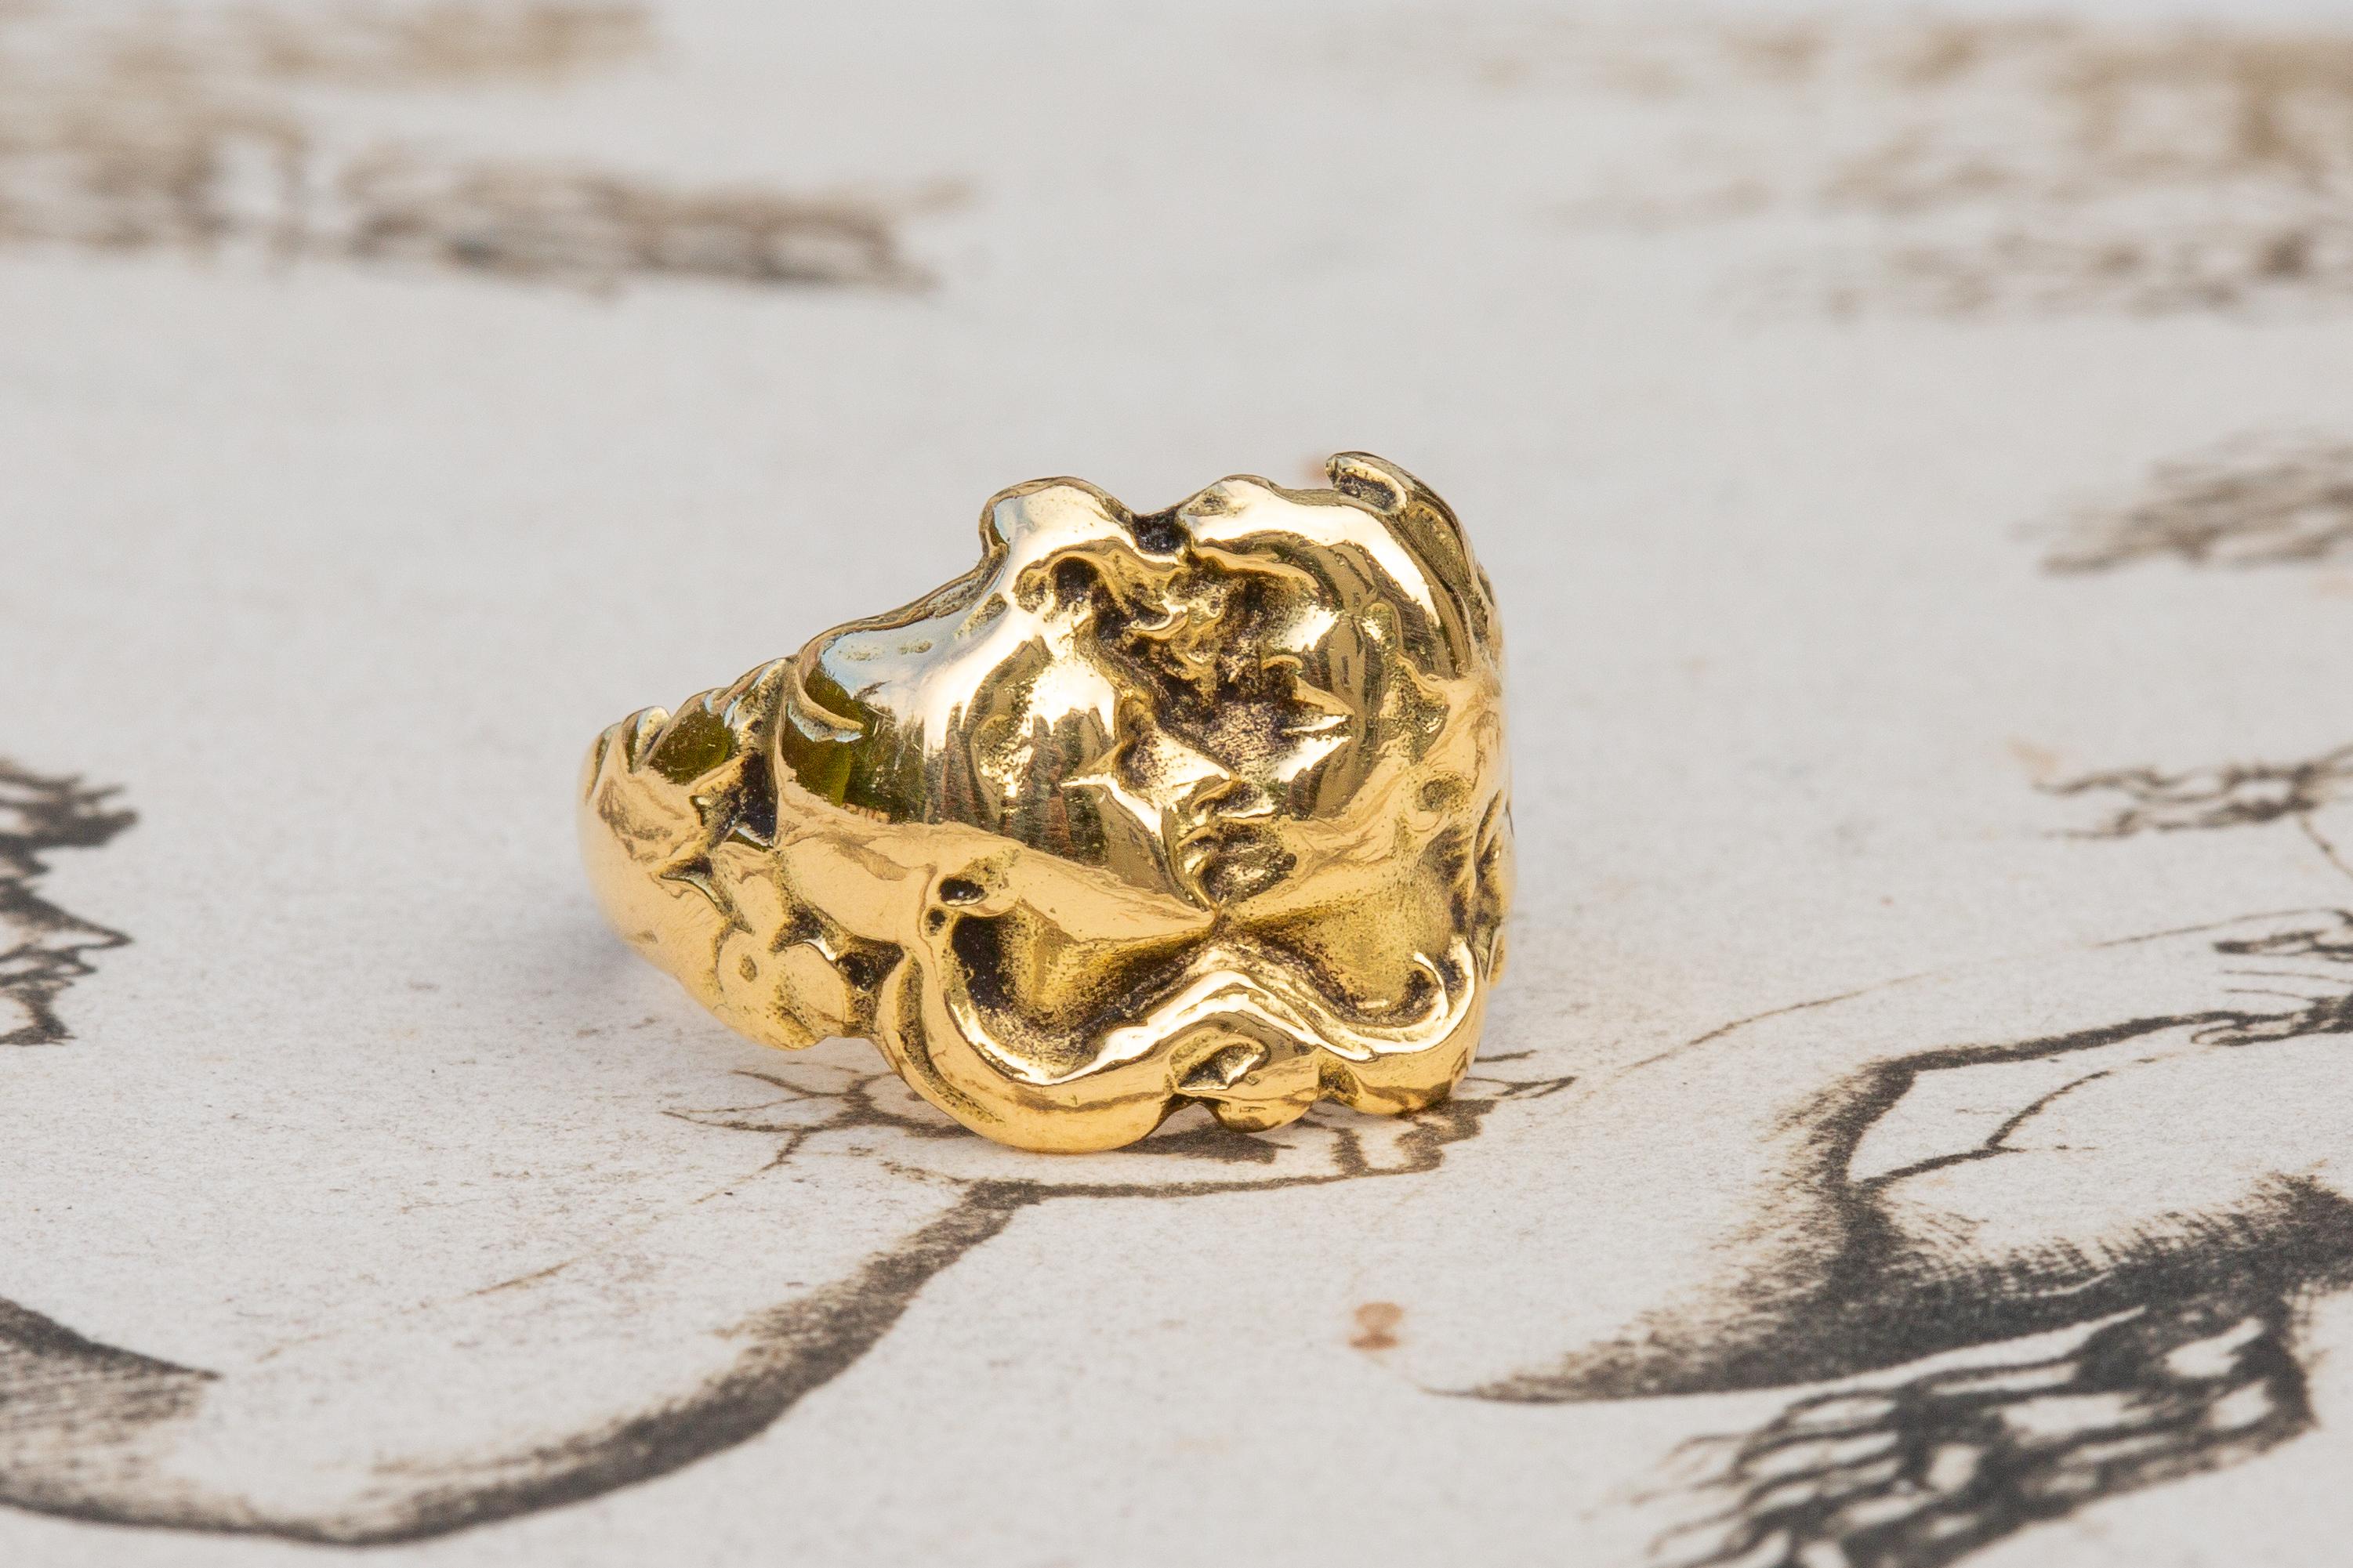  French Antique Art Nouveau 18K Gold Ethereal Figural Kissing Ring c.1910 3